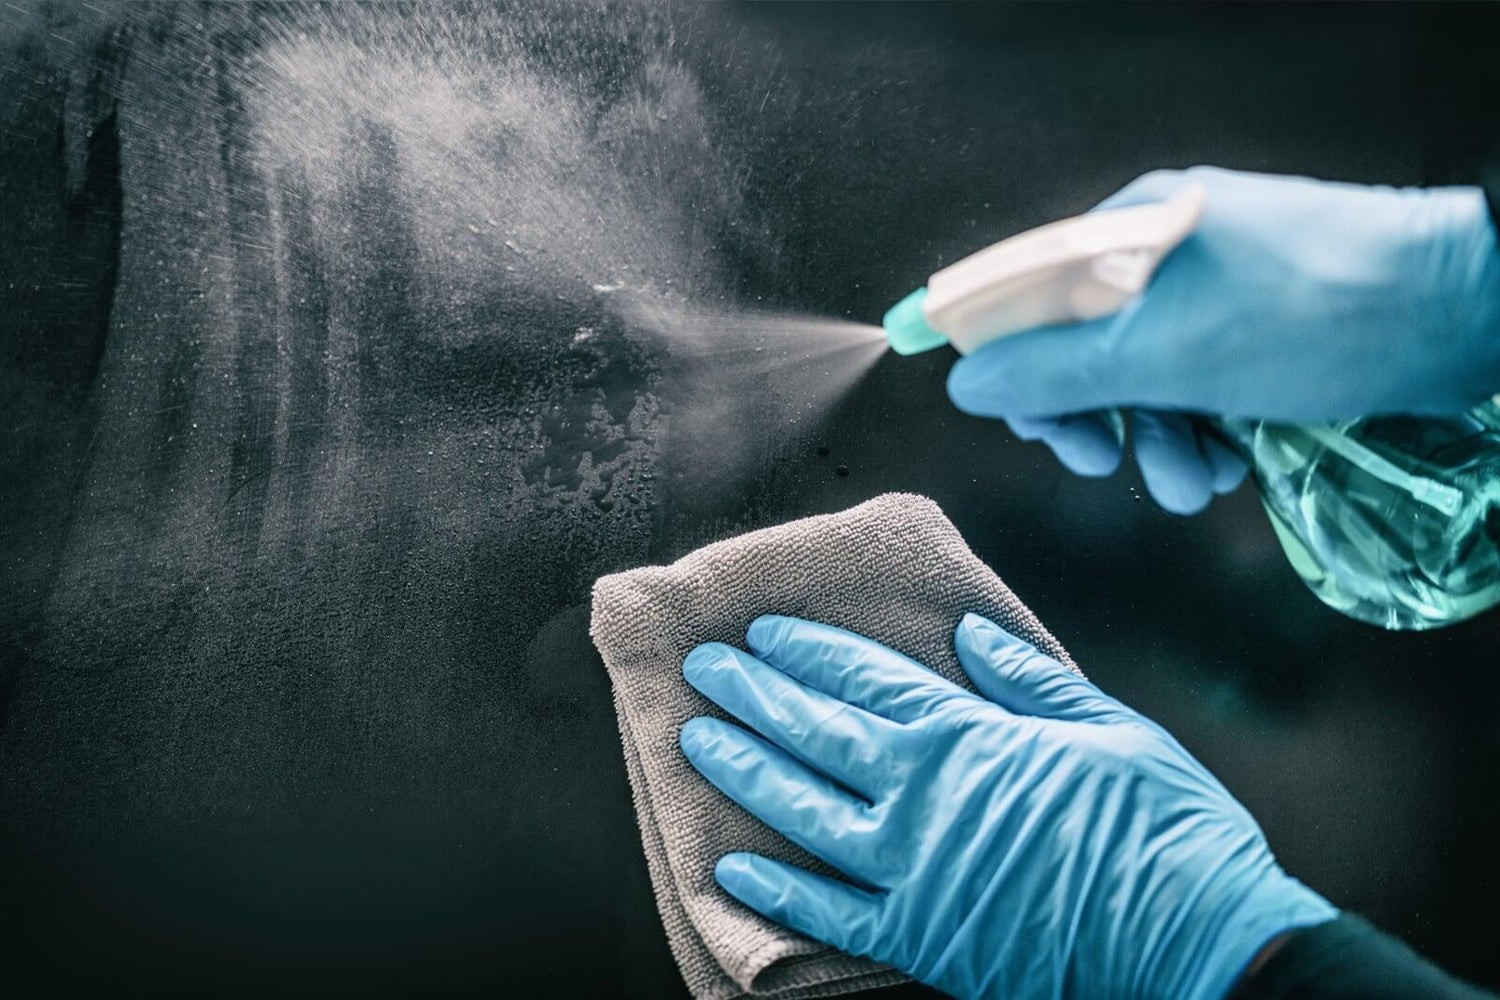 A person wearing blue gloves sprays and wipes down a glass surface with a grey cloth and glass cleaner.